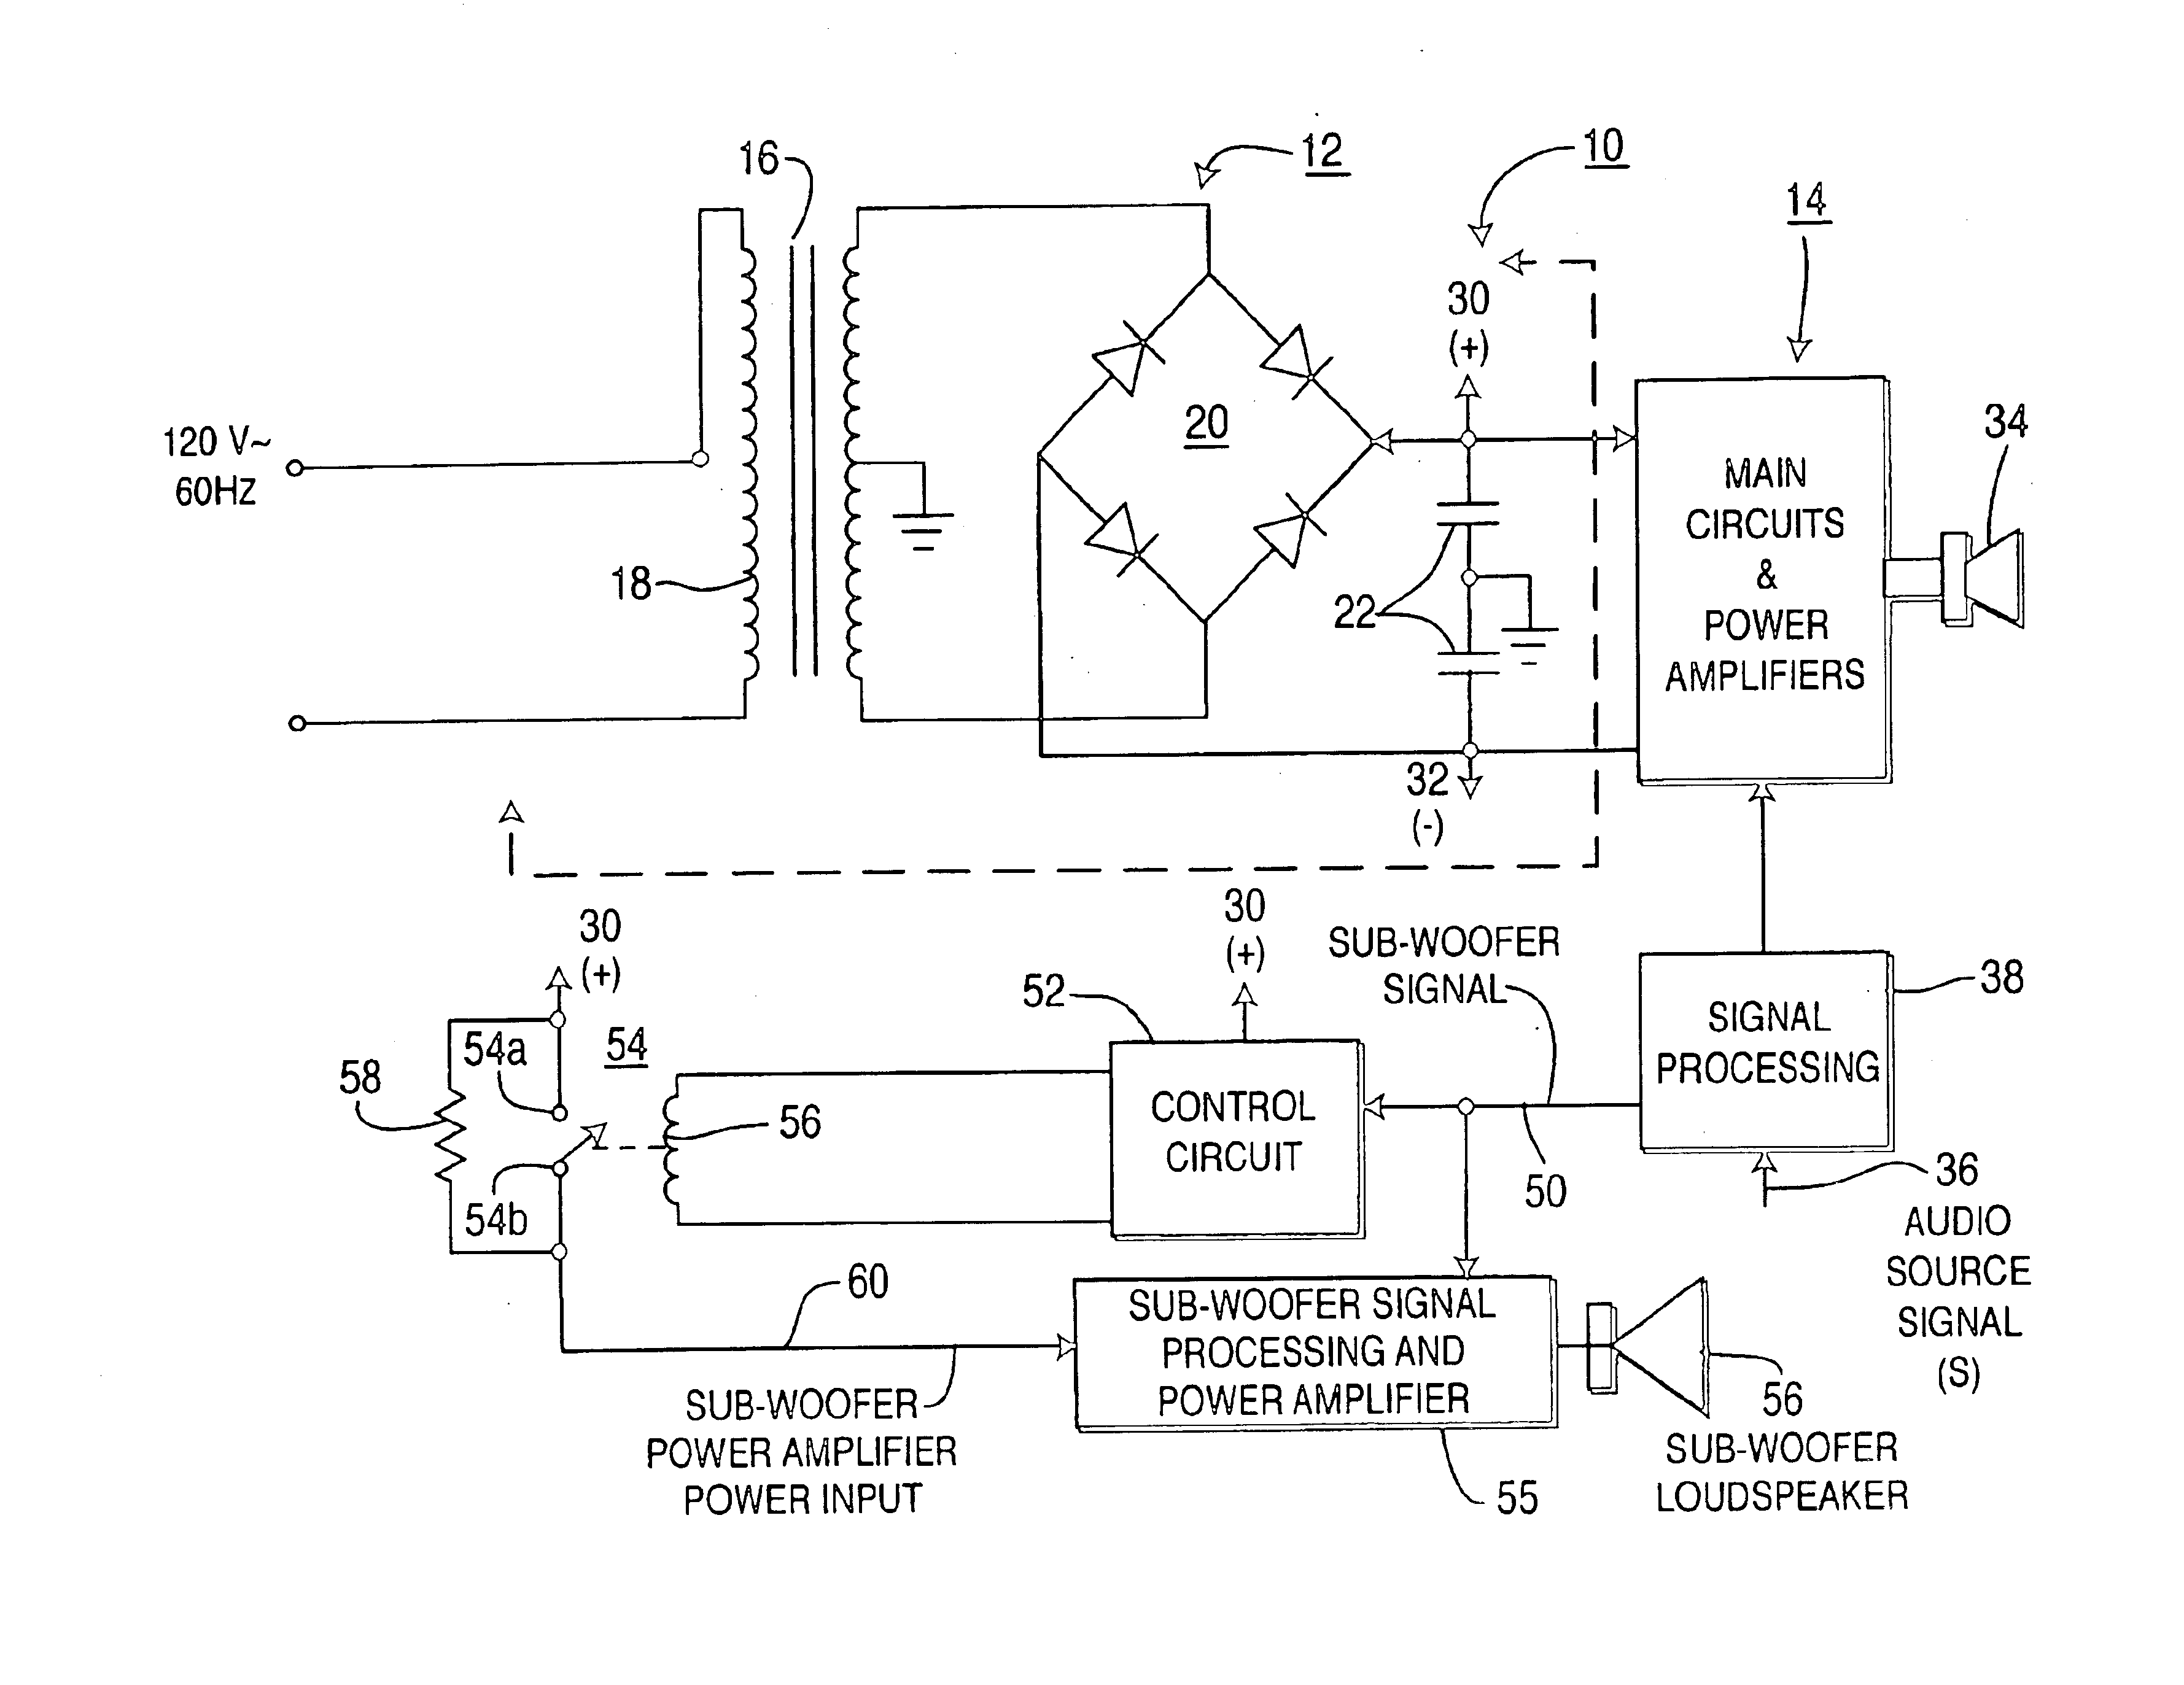 Dynamic allocation of power supplied by a power supply and frequency agile spectral filtering of signals